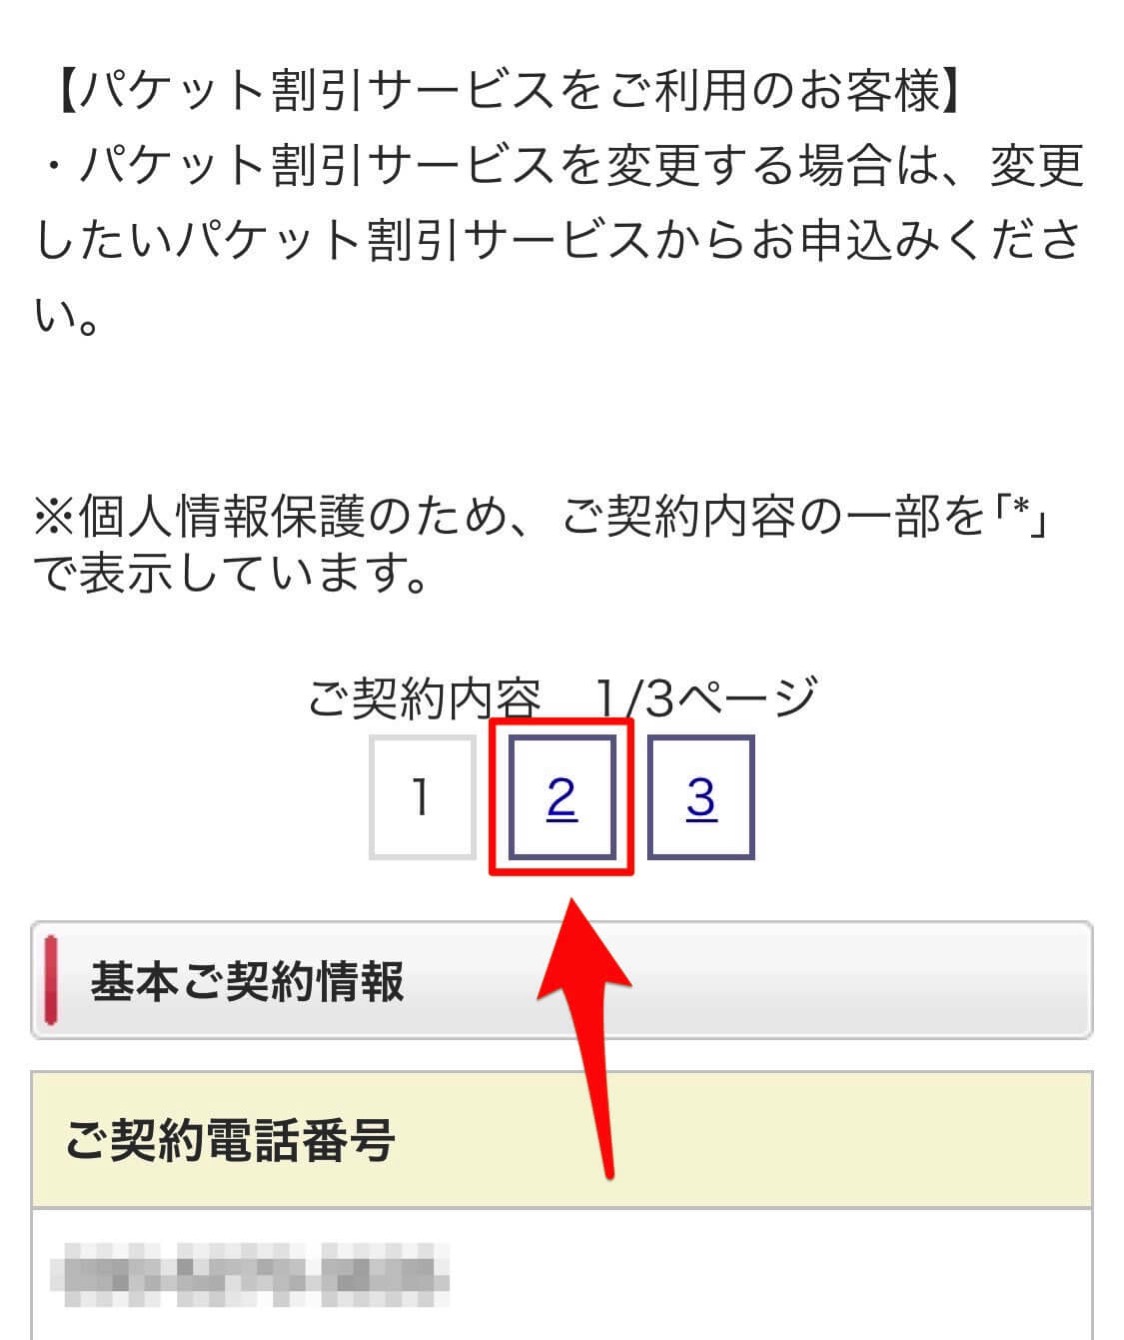 The docomo one number service cancellation of a contract 4